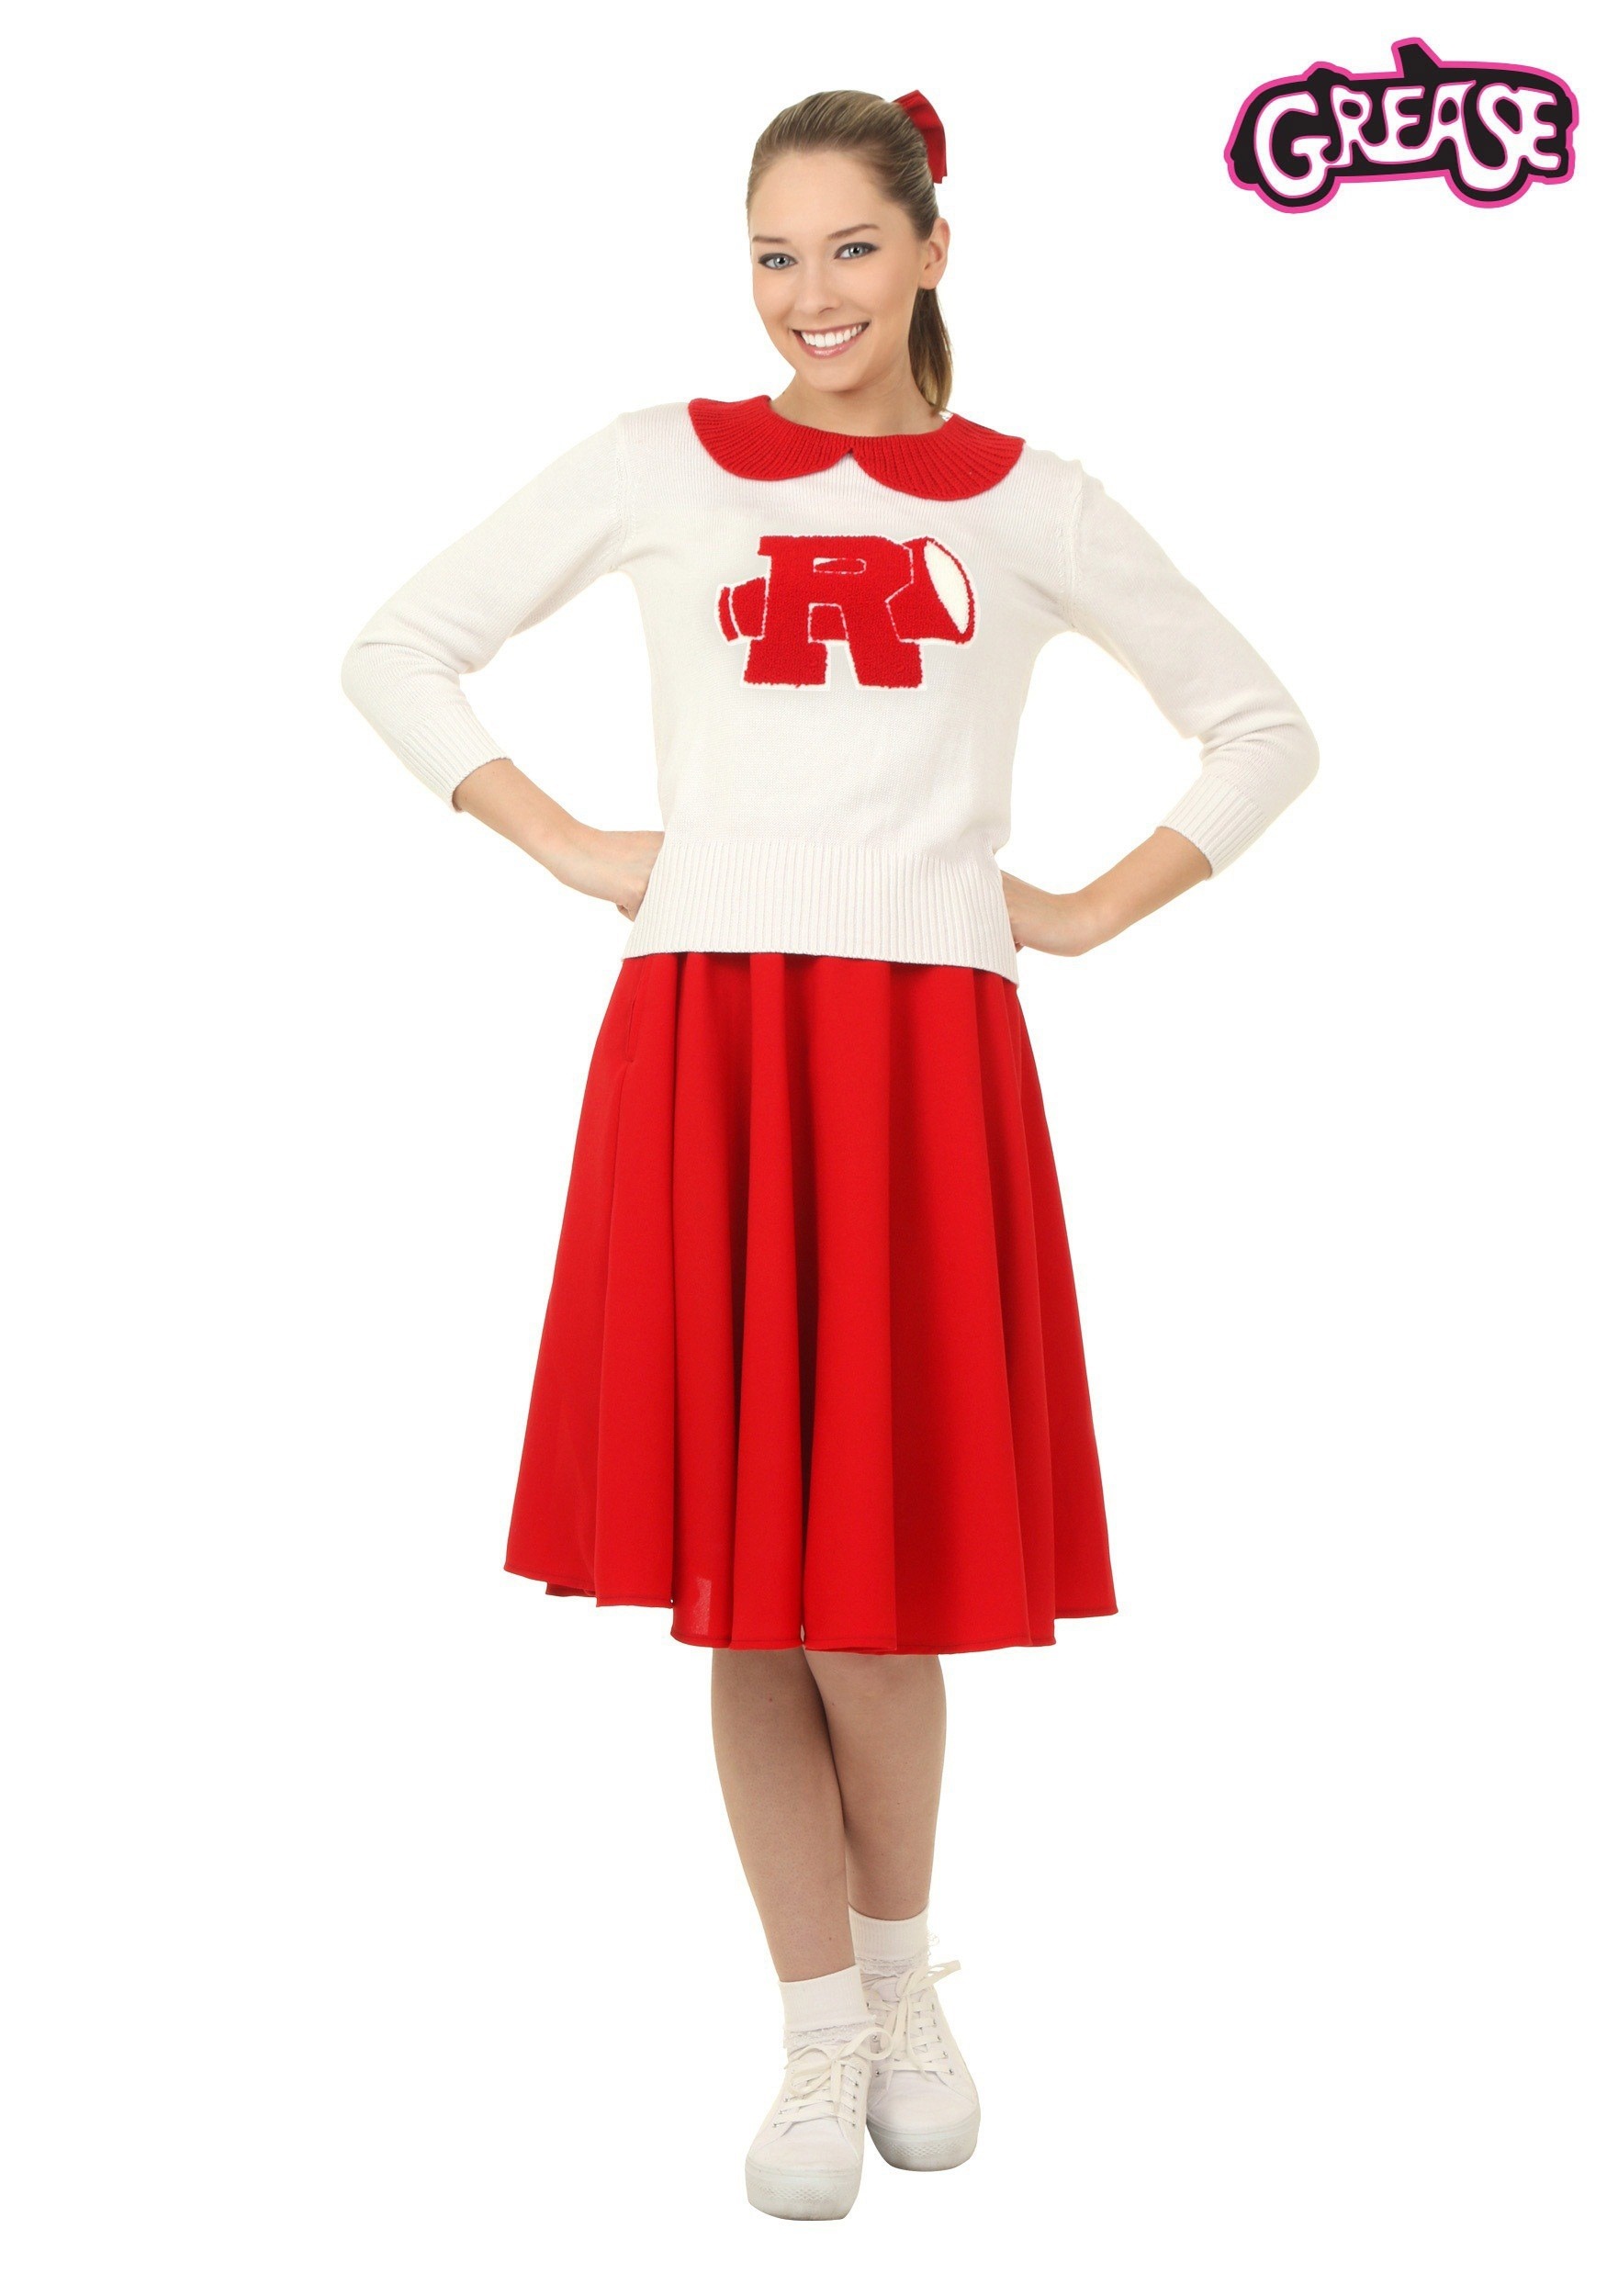 Grease Rydell High Plus Size Women's Cheerleader Costume